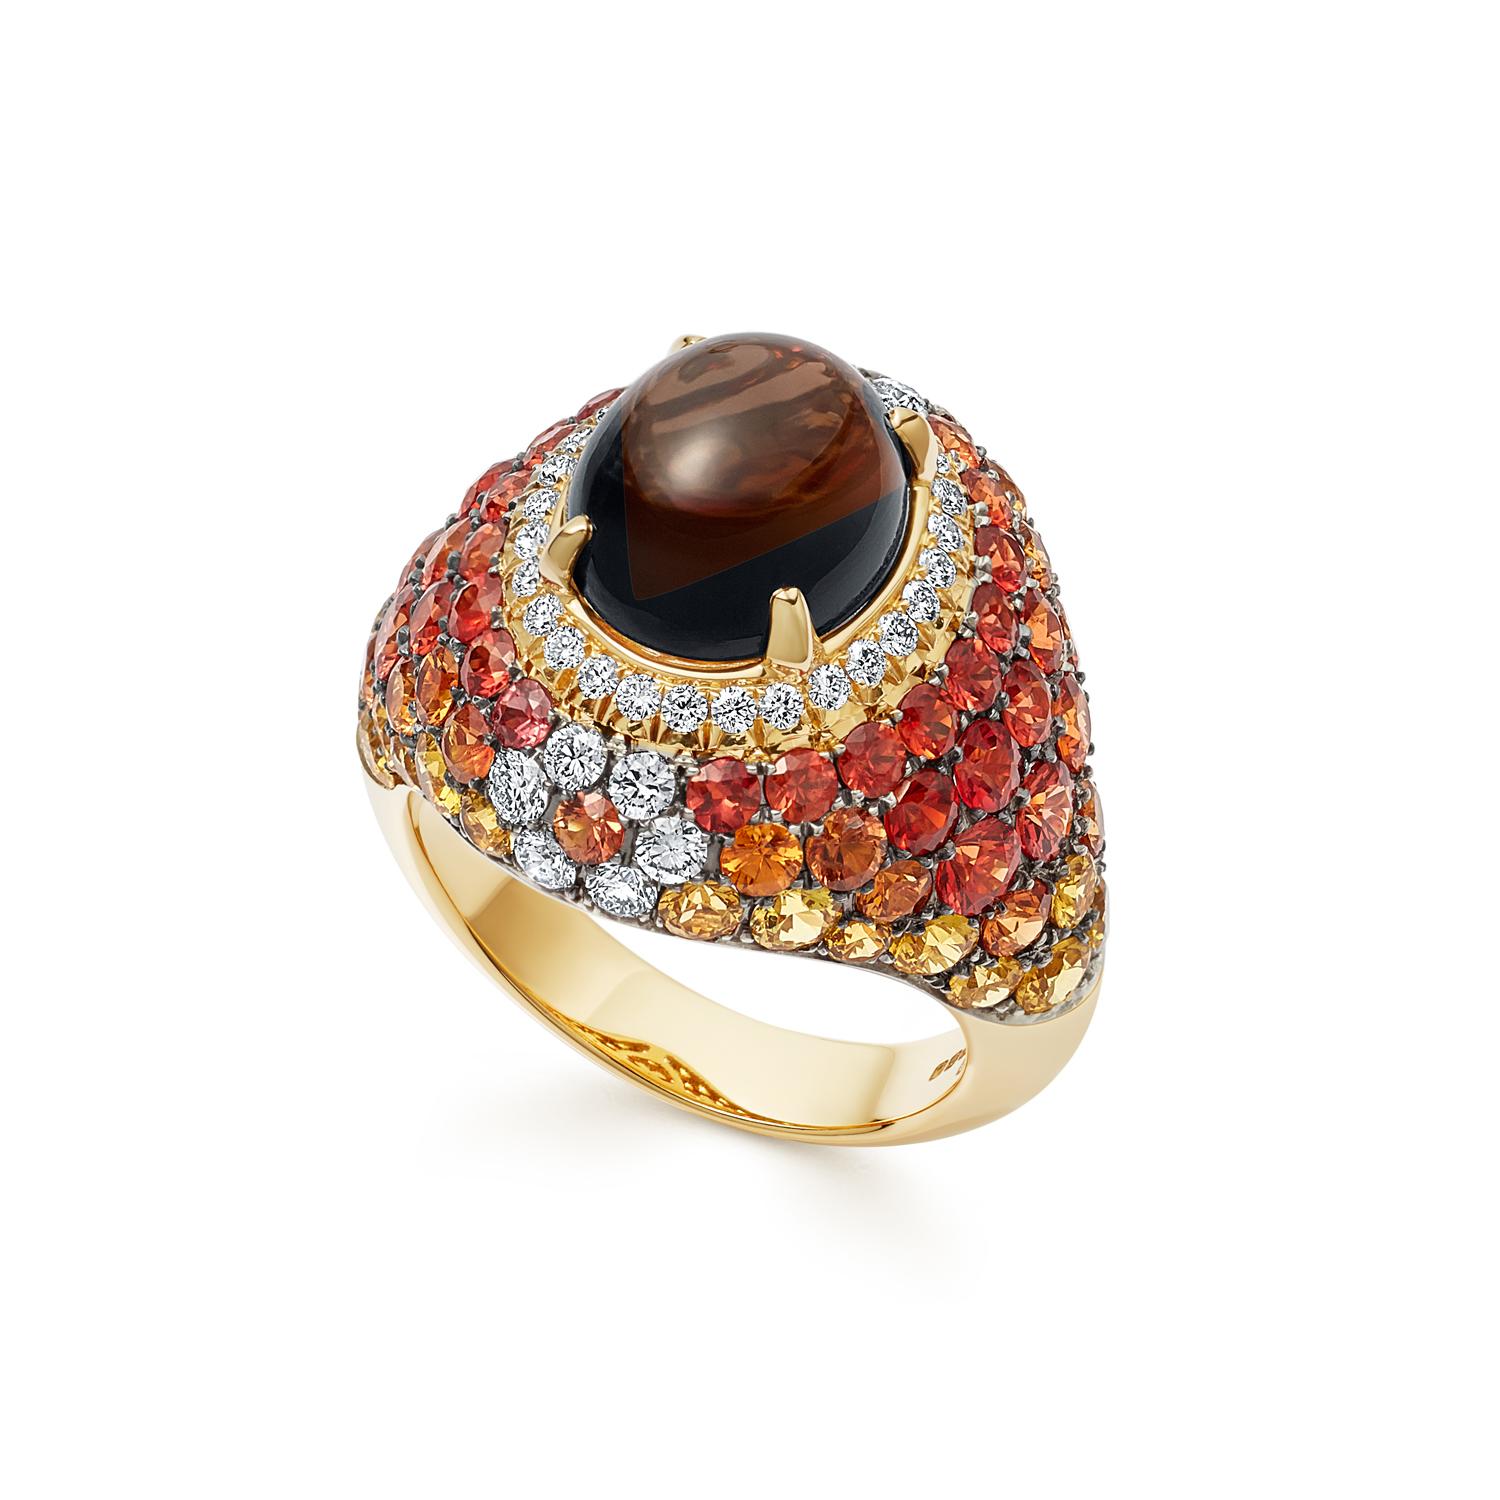 In this cocktail ring, a delicate circle of brilliant cut diamonds encompass a mesmerising dark smokey quartz cabochon, expertly contrasting against the harmonious mix of vibrant yellow and orange sapphires.

Details
- 18 karat Yellow Gold
- 5.79